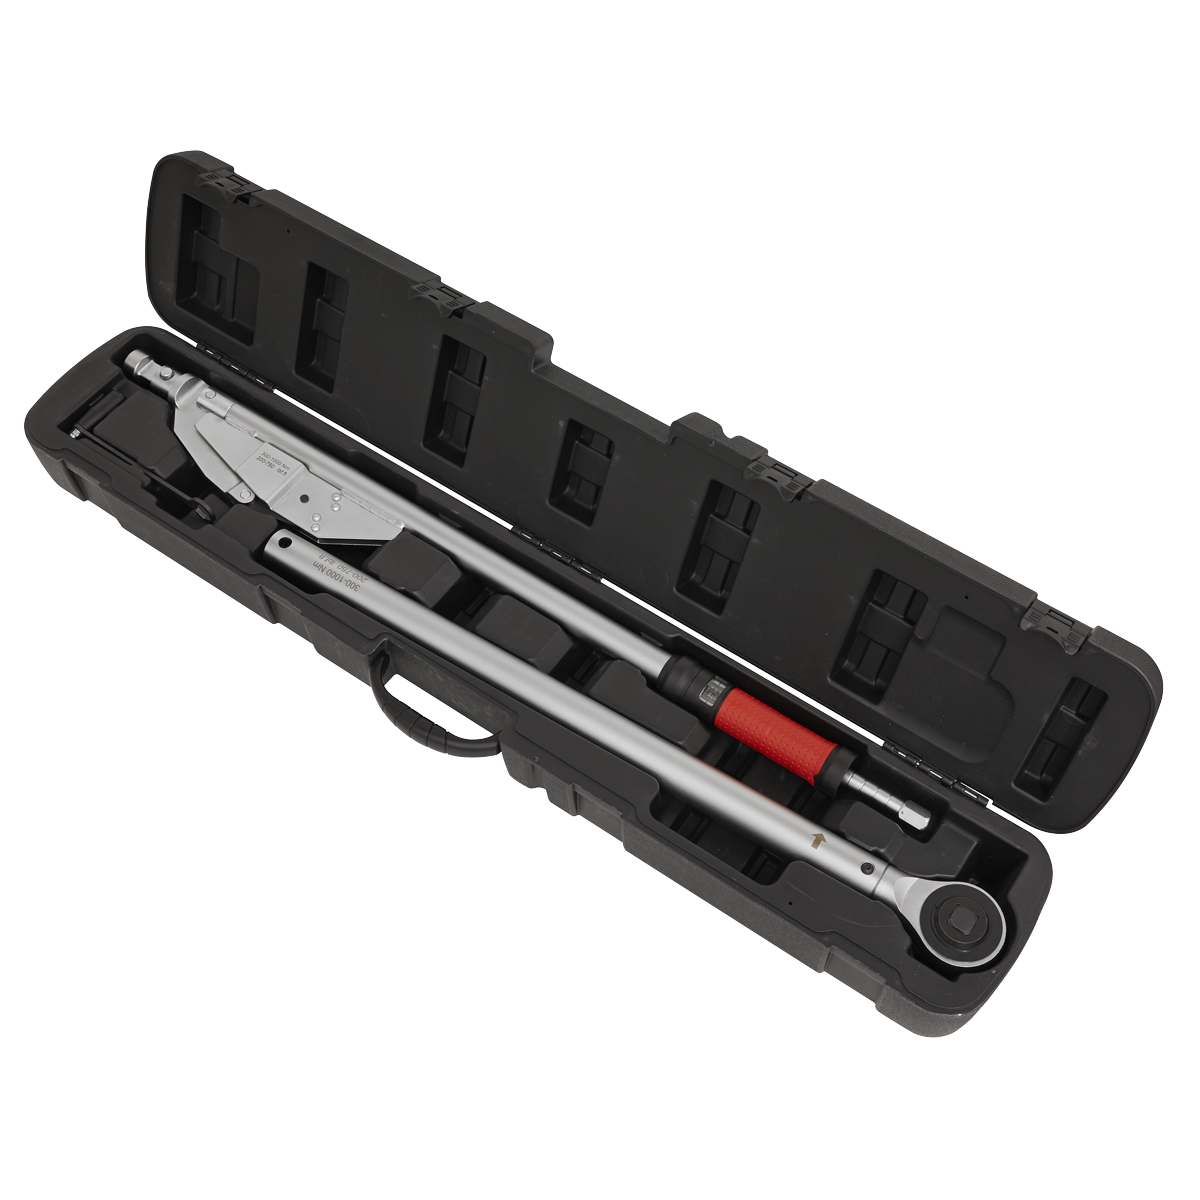 Torque wrench with 300-1000Nm range